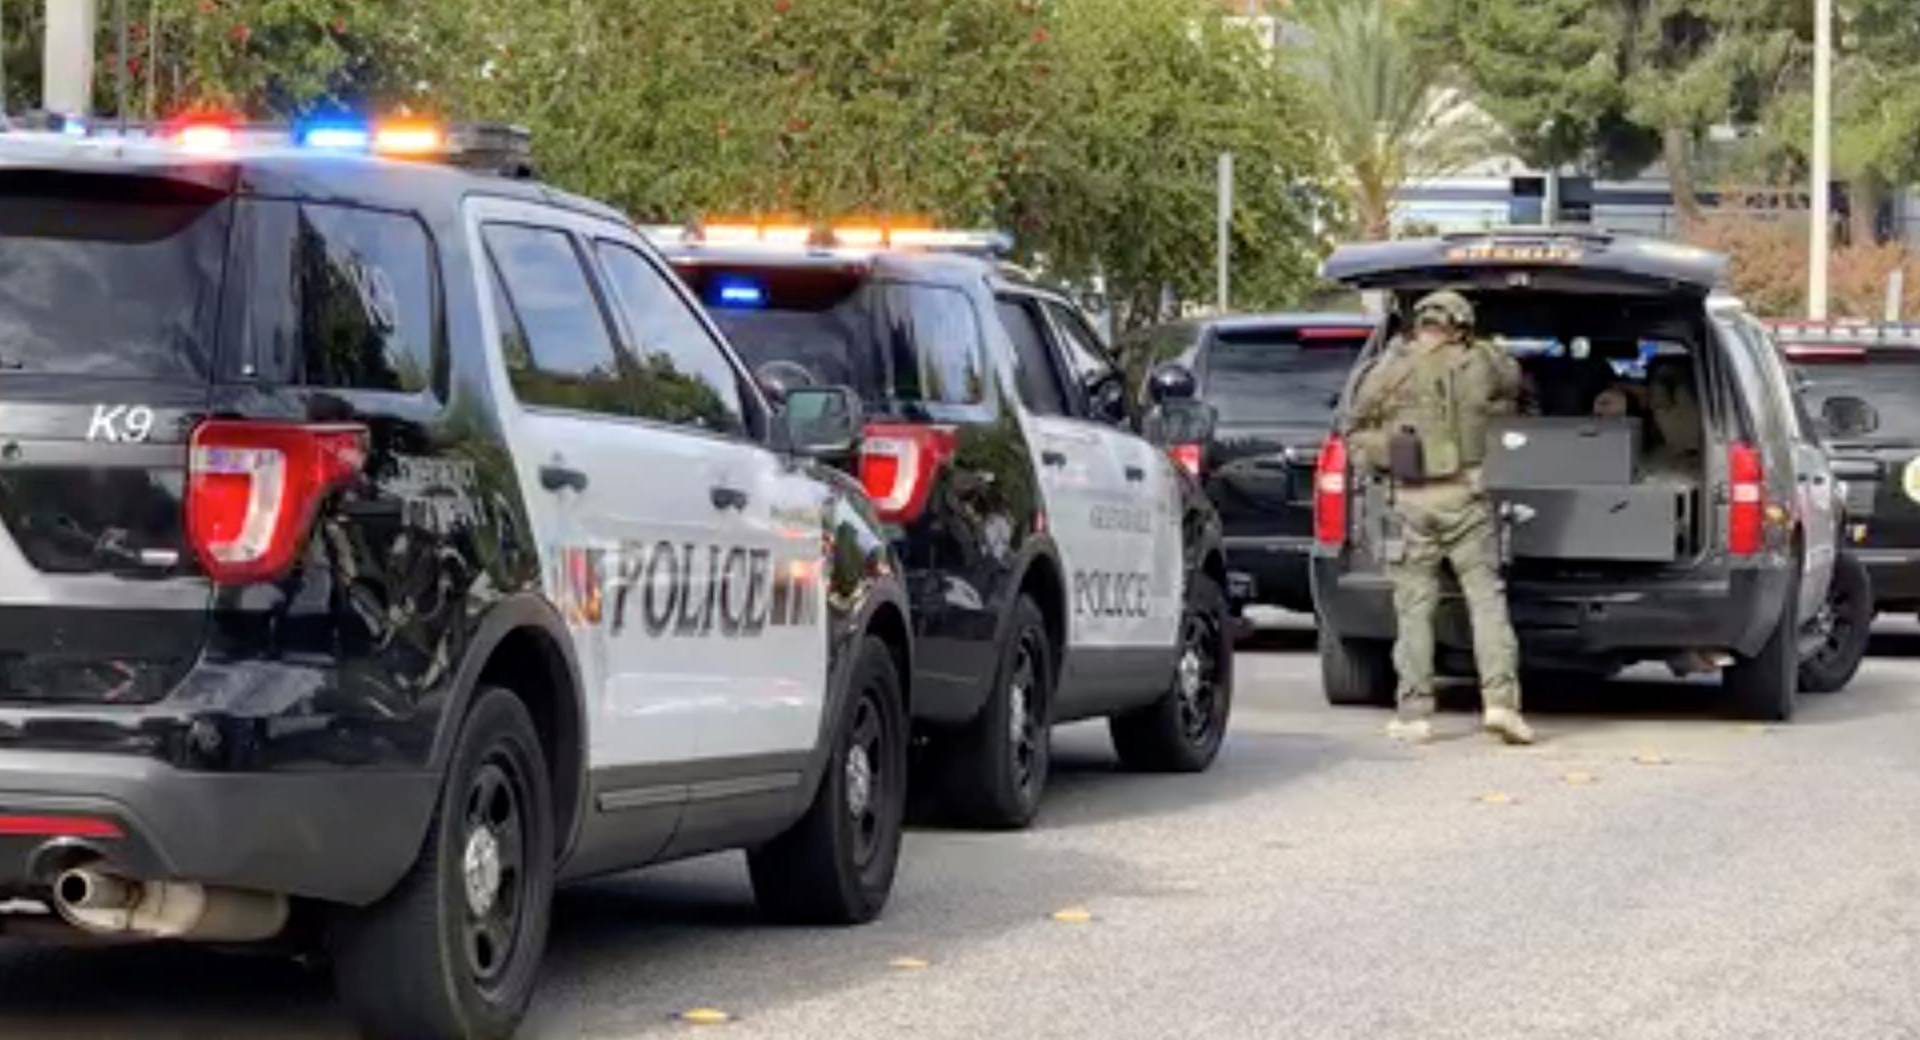 Sheriff puts on tactical gear after a shooting at Saugus High School in Santa Clarita, California